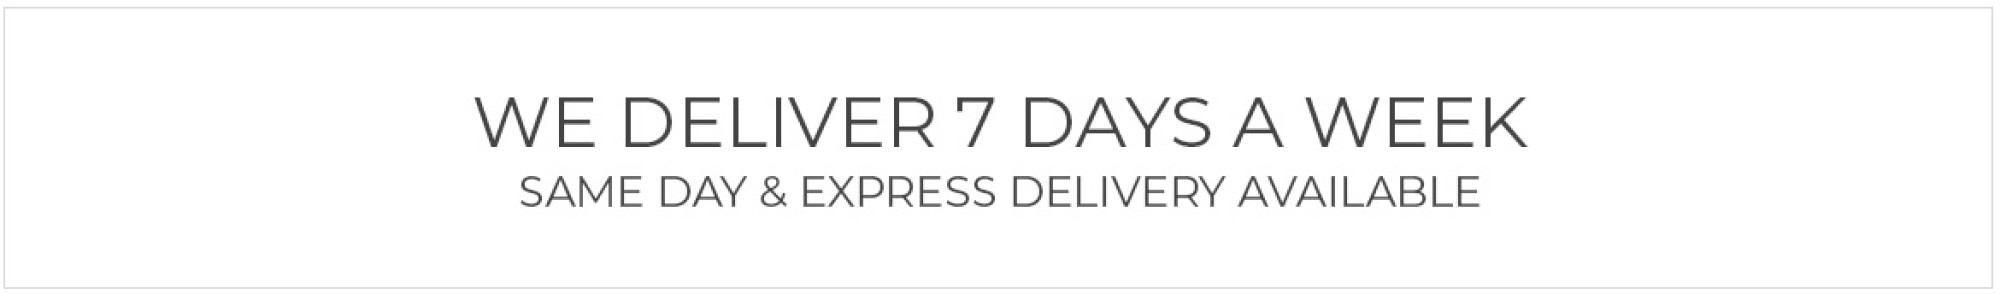 Columbus, Ohio Florist - Same Day and Express Delivery 7 Days A Week